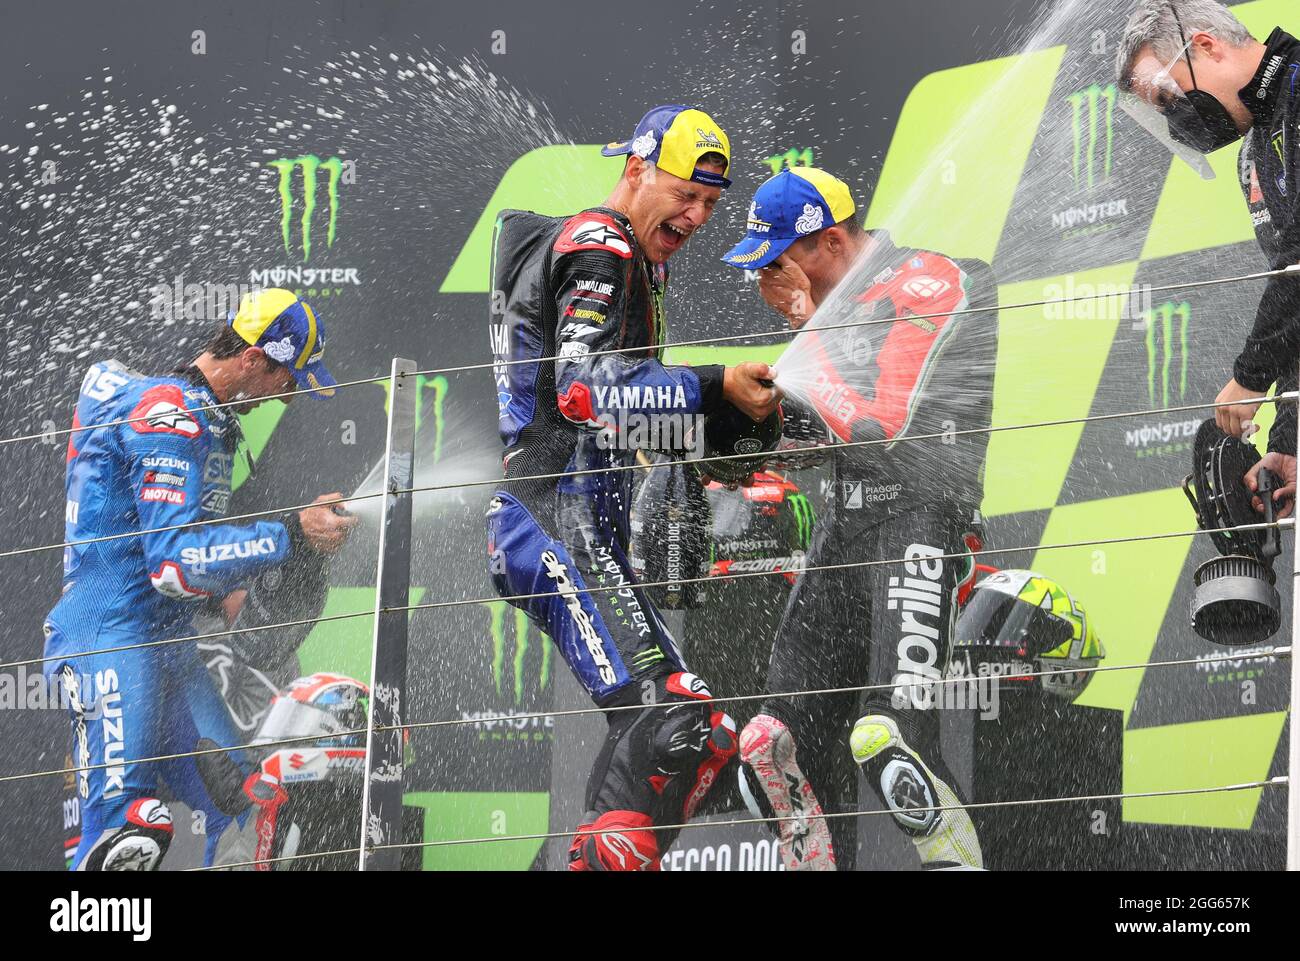 Silverstone, UK. 29th Aug 2021. Fabio Quartararo Monster energy Yamaha MotoGP spraying champagne on podium for MotoGP race during the Monster Energy British Grand Prix MotoGP at Silverstone Circuit, Towcester, England on the 27 to 29 August 2021. Photo by Ian Hopgood. Credit: PRiME Media Images/Alamy Live News Stock Photo